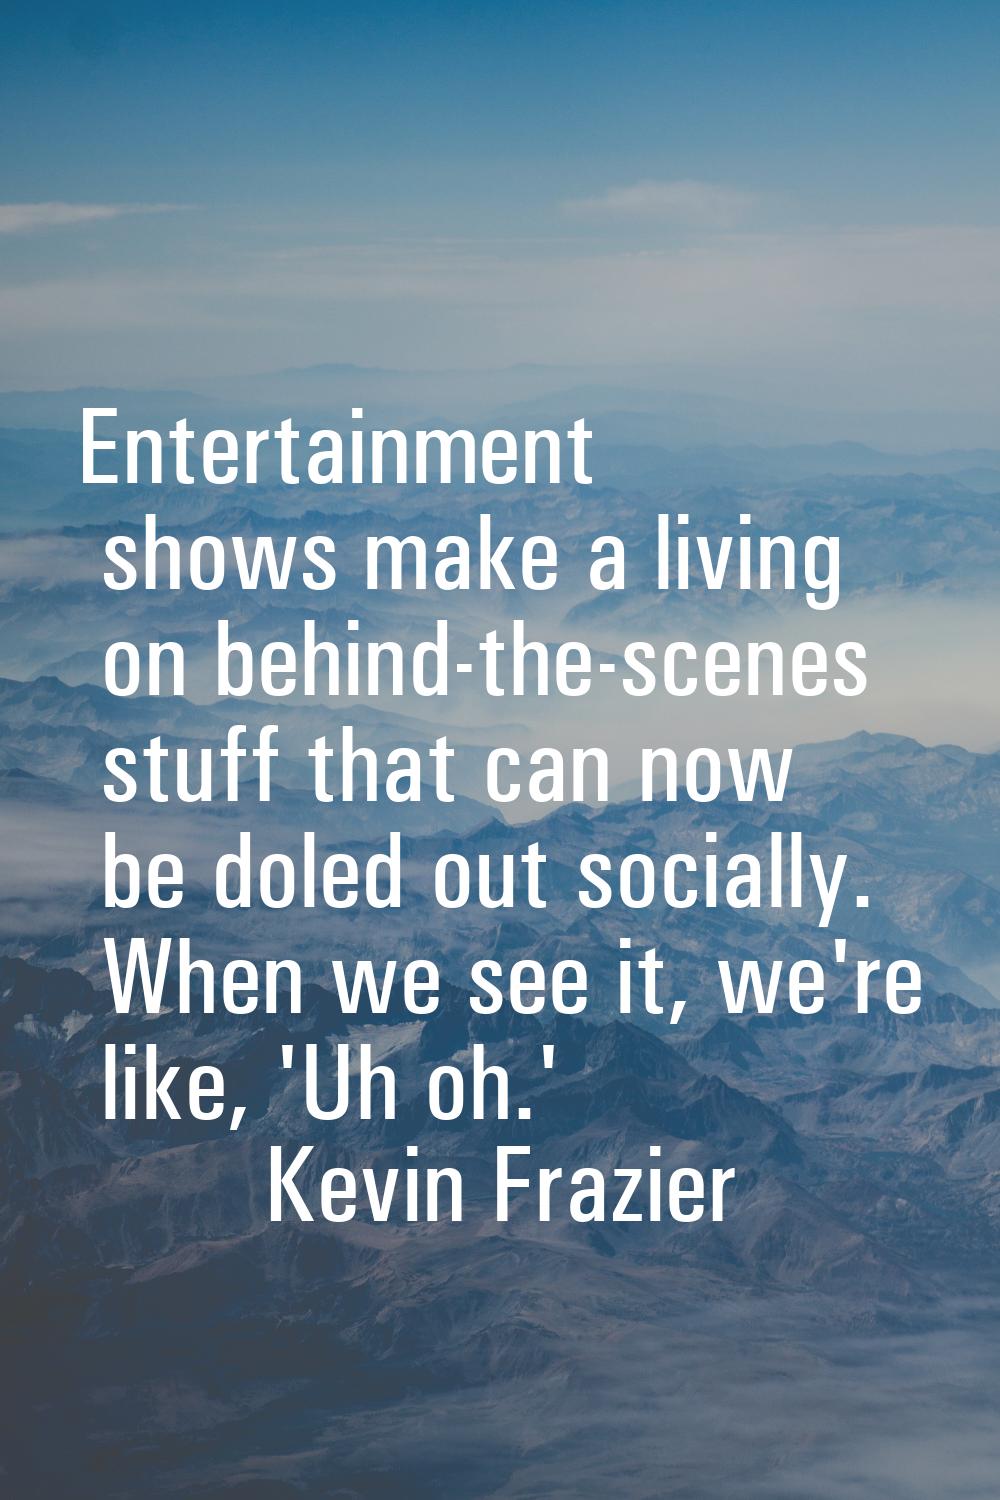 Entertainment shows make a living on behind-the-scenes stuff that can now be doled out socially. Wh